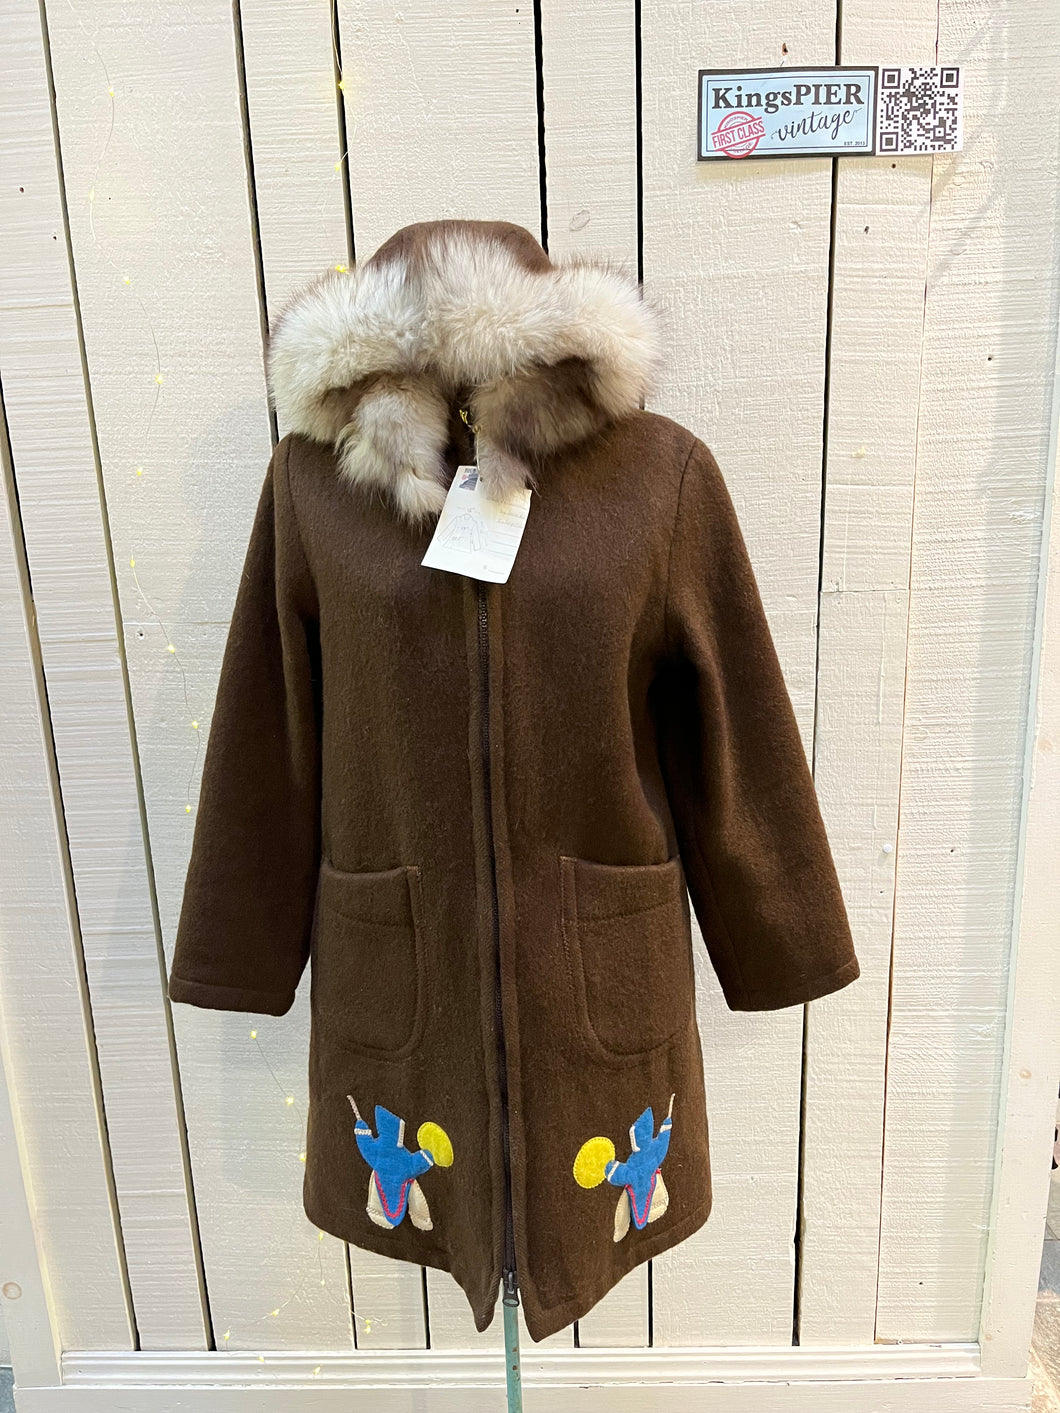 Vintage Inuvik Enterprise brown 100% pure virgin wool northern parka with zipper closure, front pockets, fur trimmed hood and felt applique in a drumming motif.

Made in Canada
Chest 38”